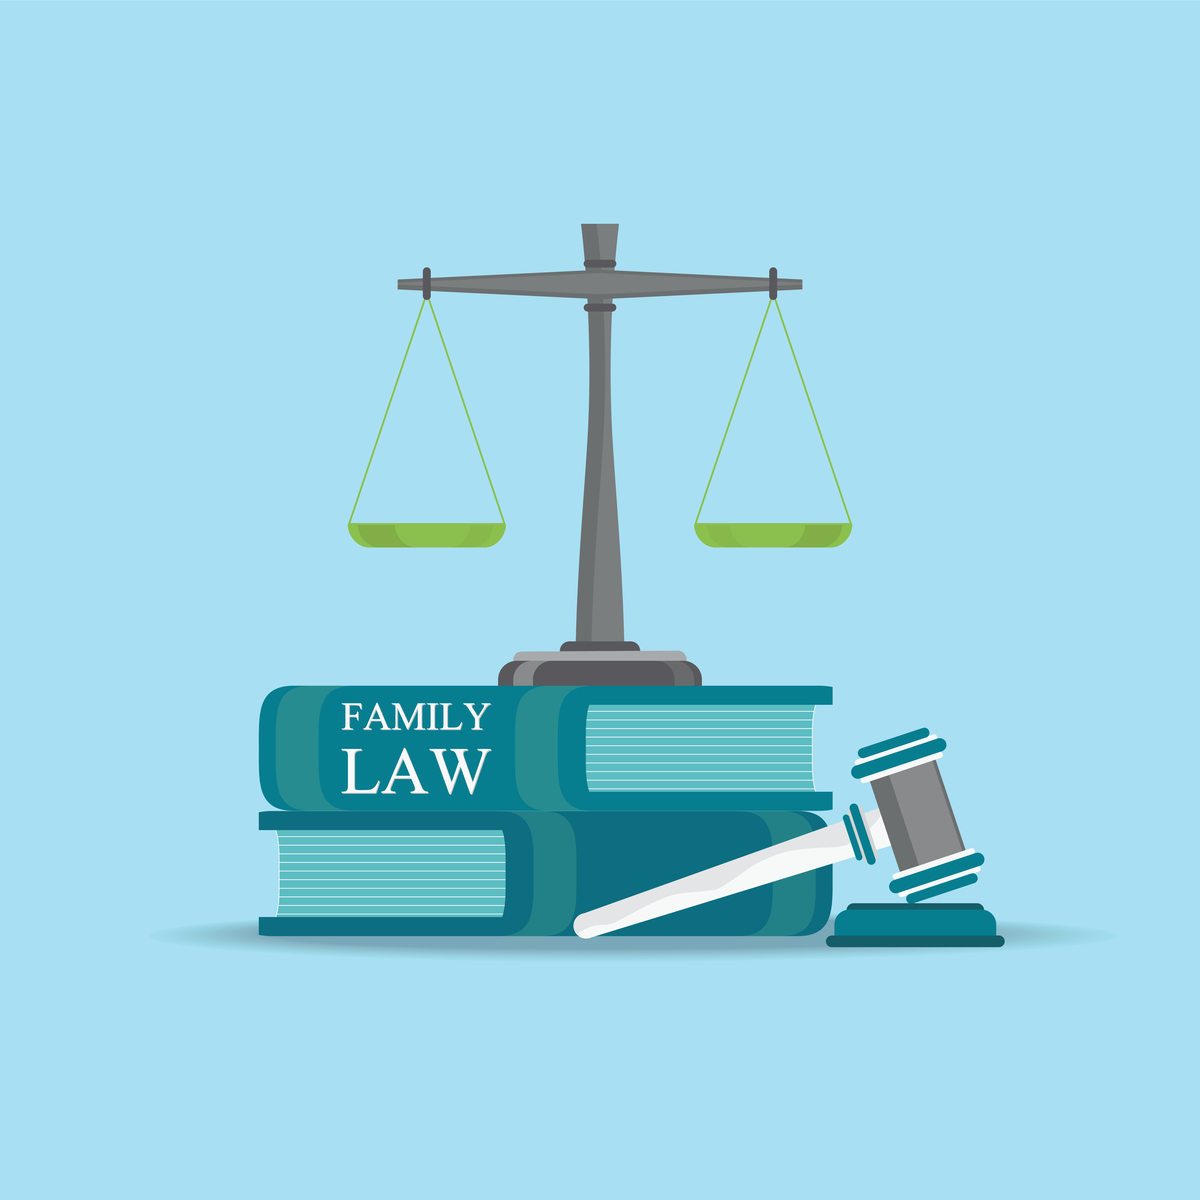 What You Need To Know About The Family Law Court Process